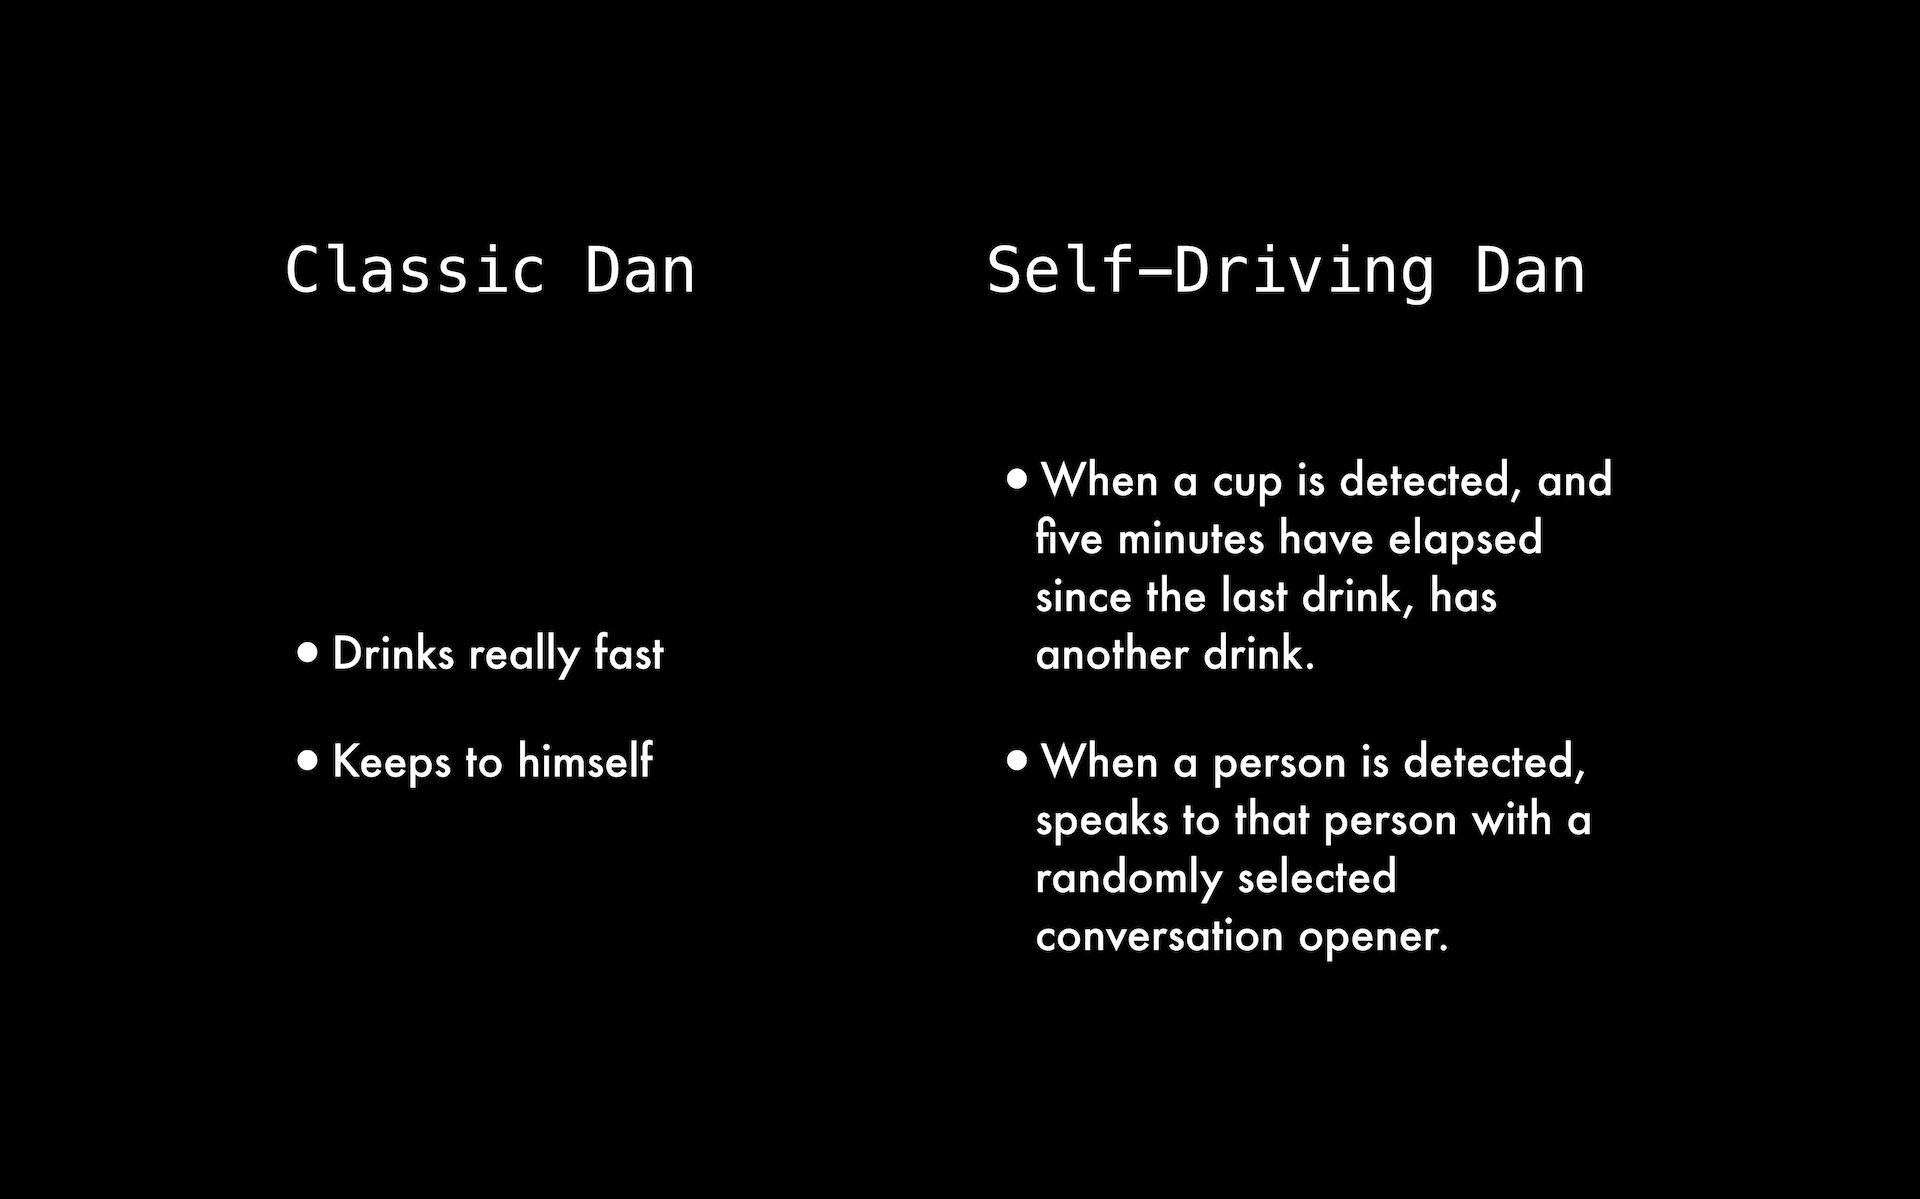 What should I do in a bar?  Let's compare the Classic Dan vs. the New Self-Driving Dan as instructed by the device.